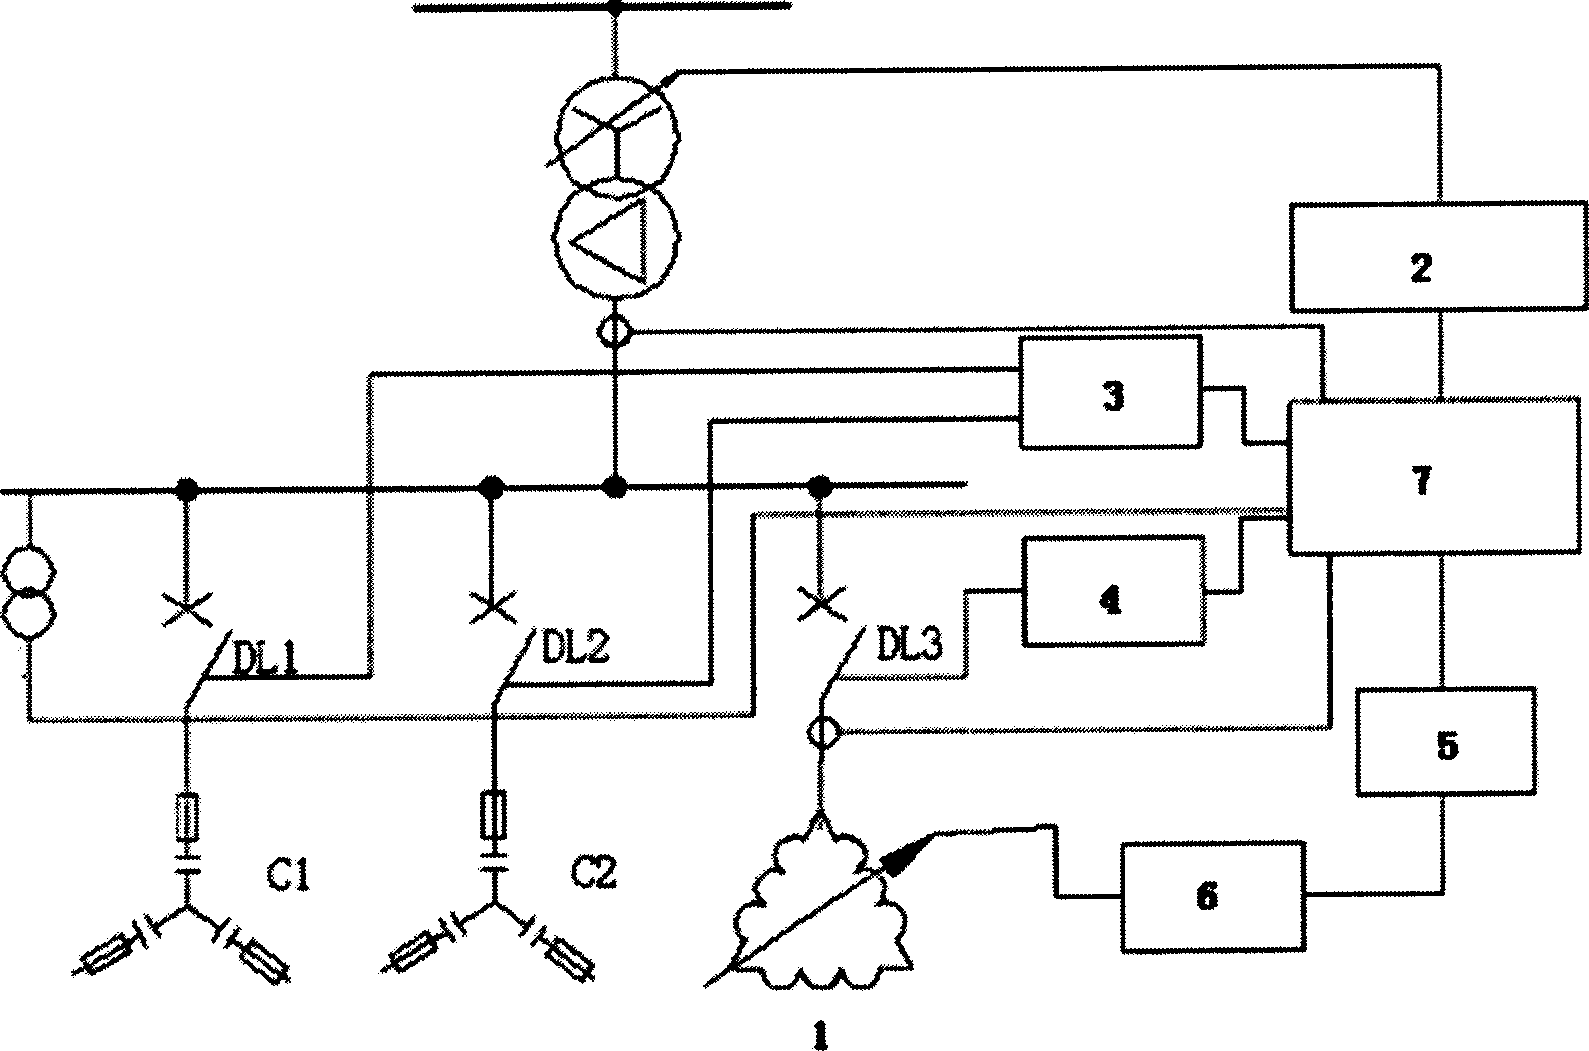 Voltage reactive power integrated control device based on magnetic control reactor